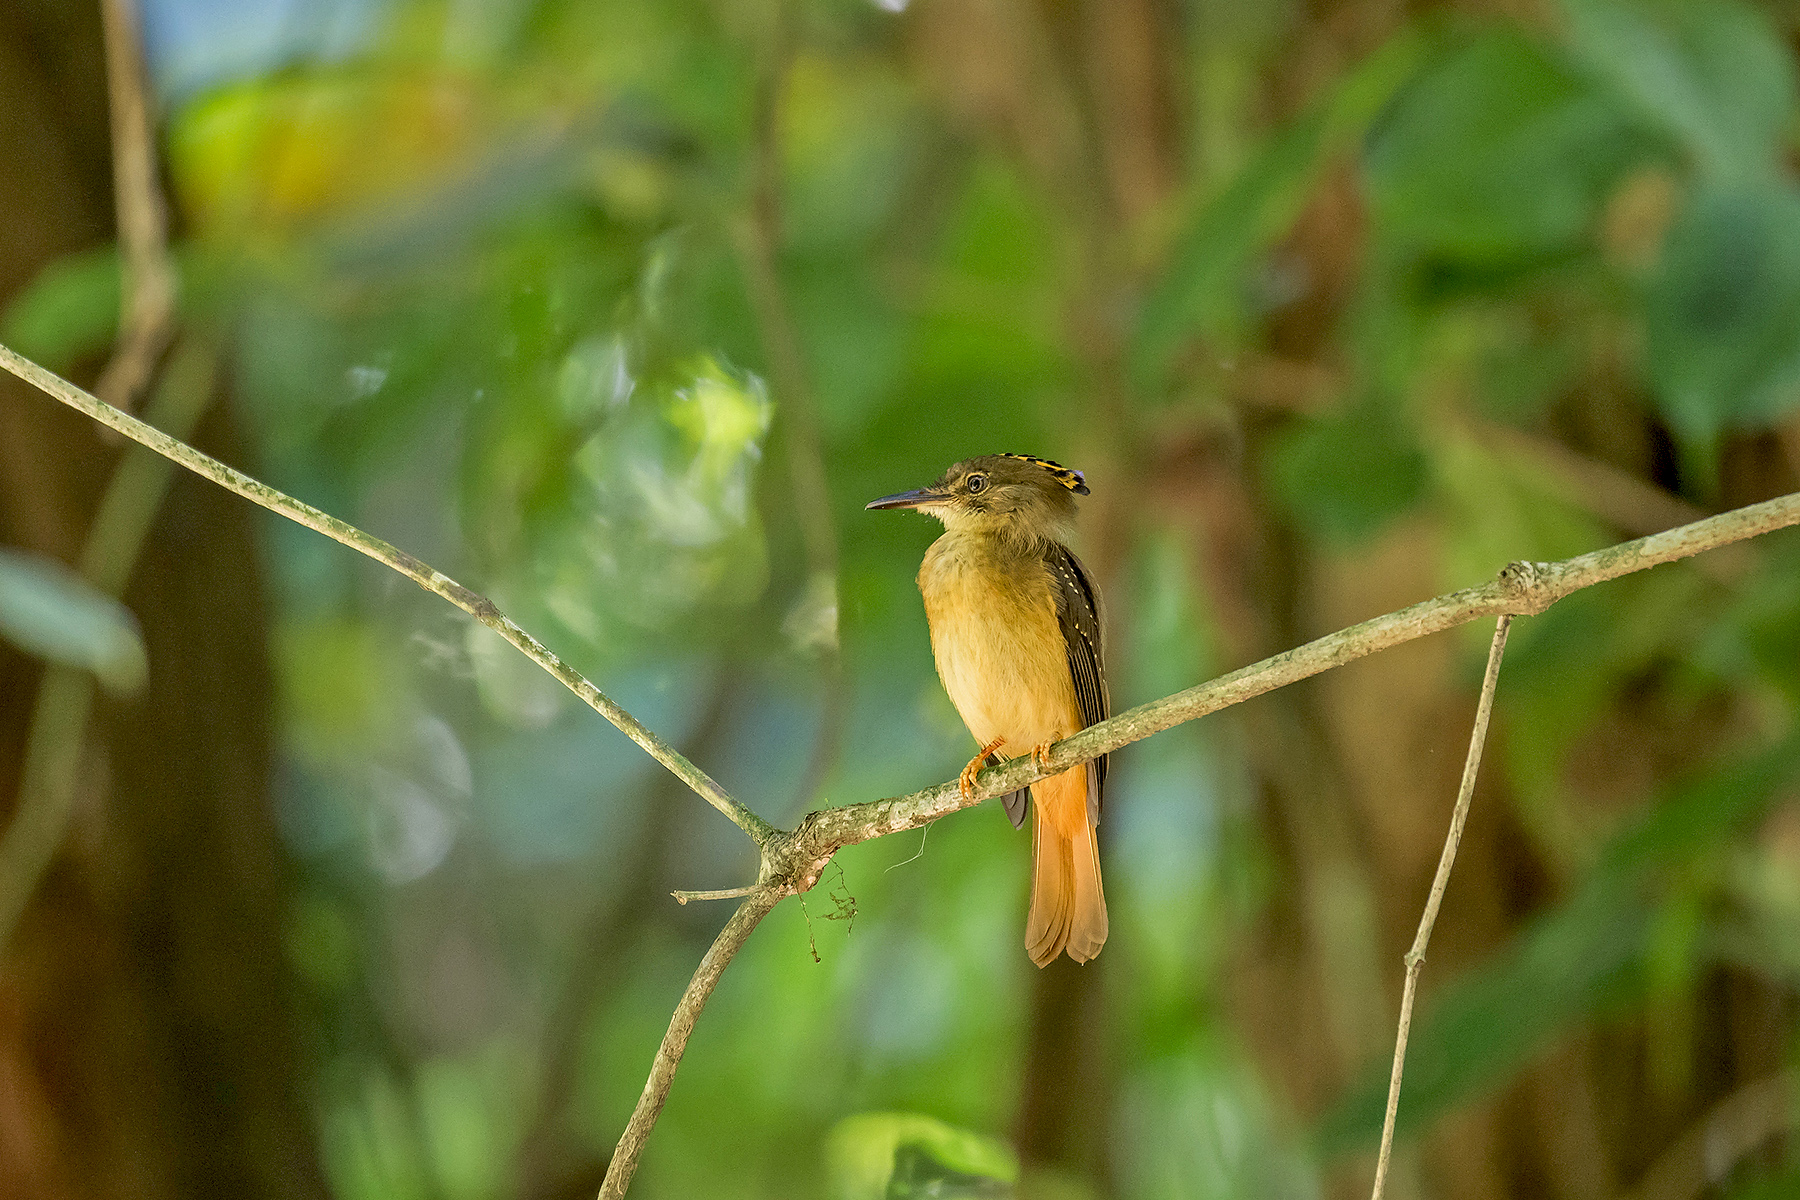 Northern Royal Flycatcher on our Costa Rica birding tour (image by Pete Morris)